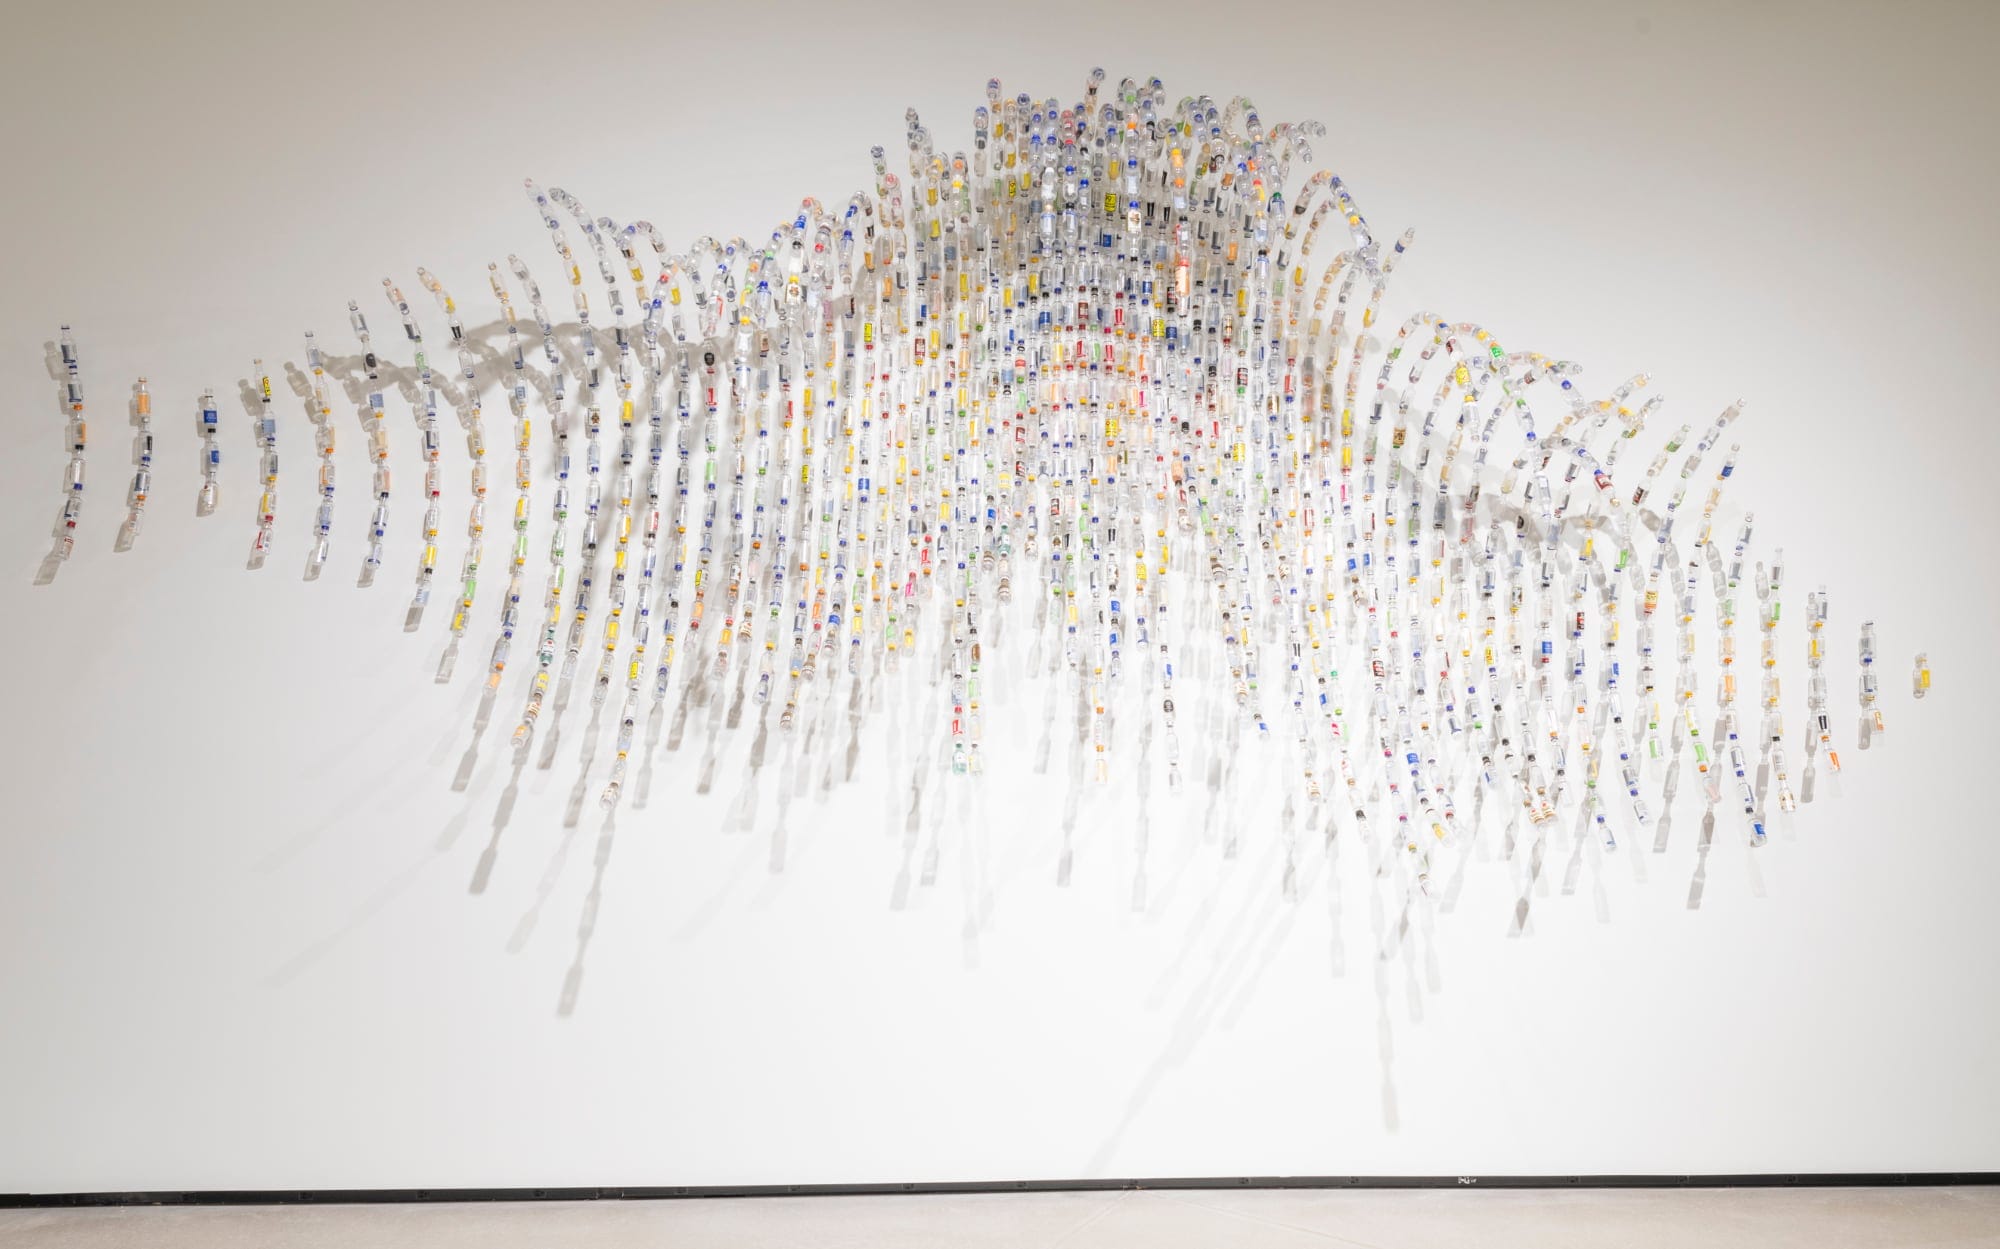 a wall sculpture that resembles the rhythms of a starling murmuration, made from tiny liquor bottles